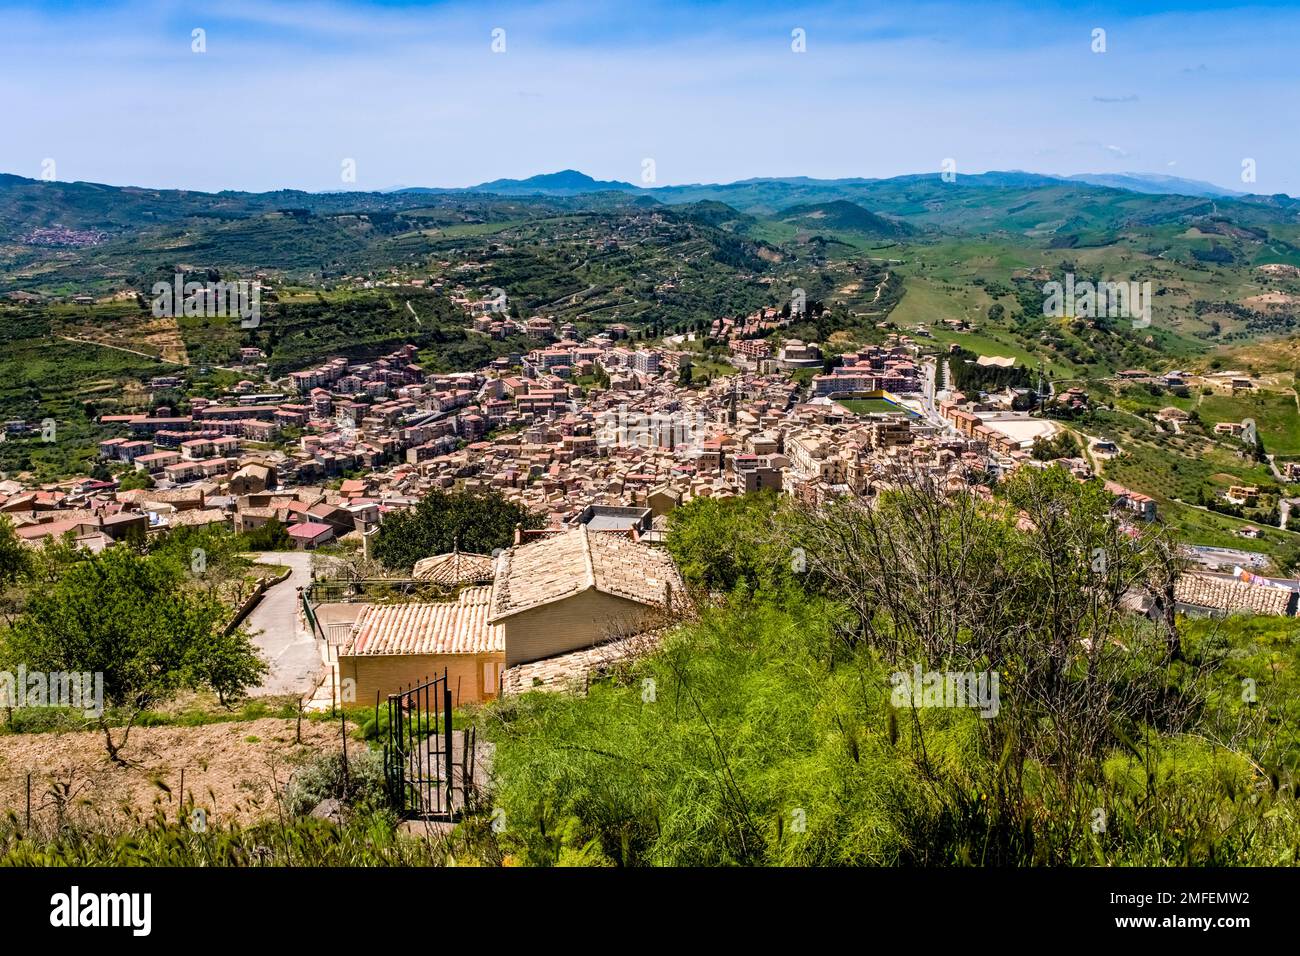 Aerial view on of the town of Agira, surrounded by agricultural landscape with green hills, trees and fields. Stock Photo